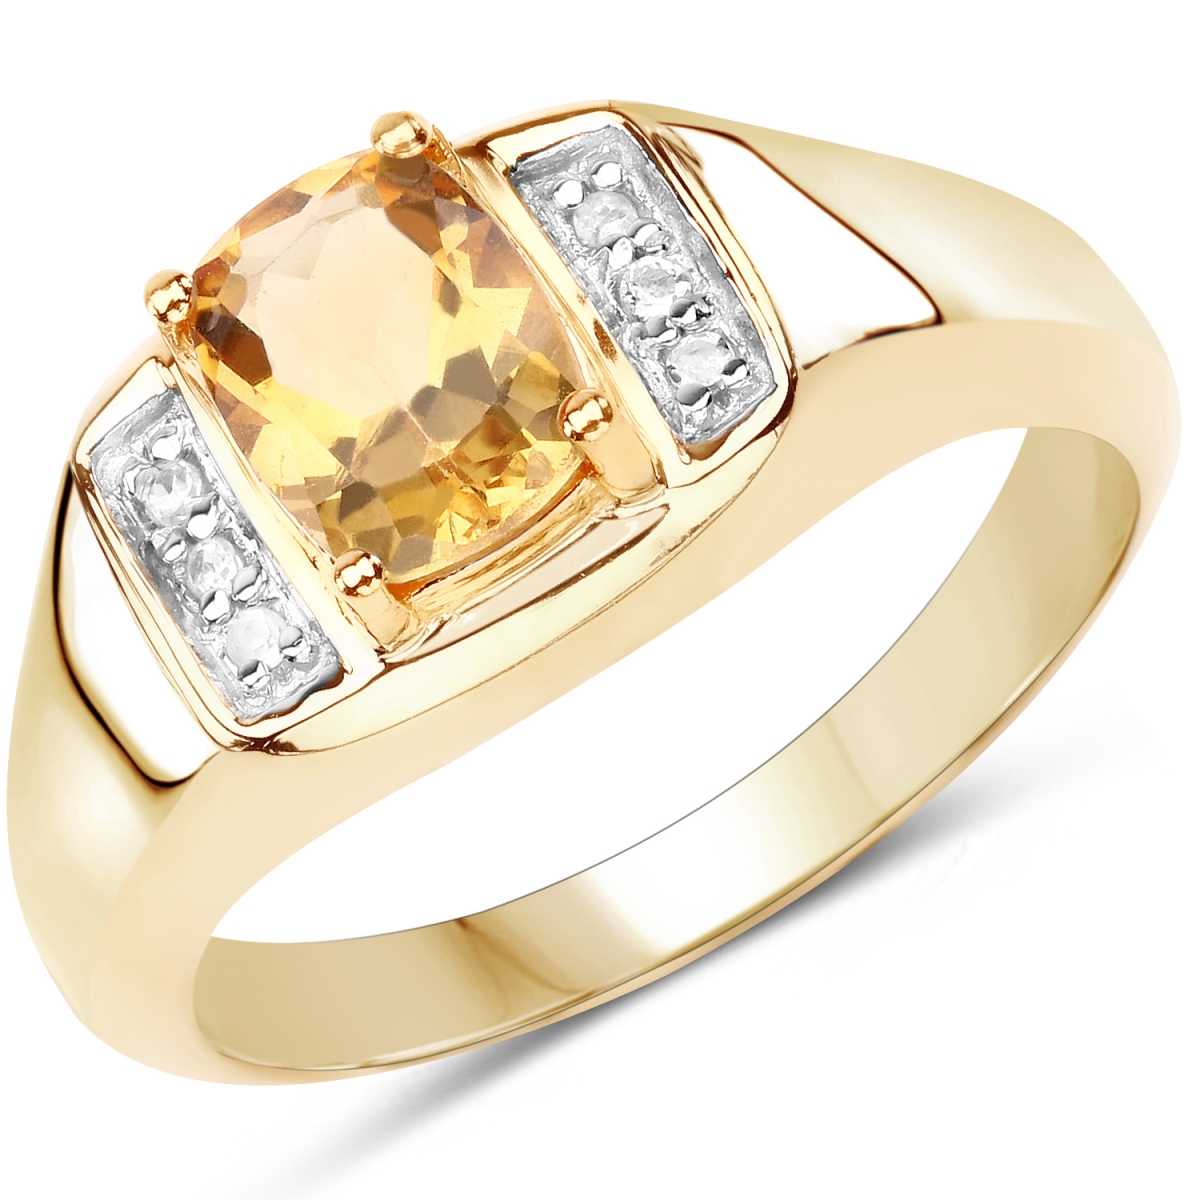 Picture of Malaika QR9437MCWT-SS14KY-10 14K Yellow Gold Plated 1.36 Carat Genuine Citrine & White Topaz 0.925 Sterling Silver Ring